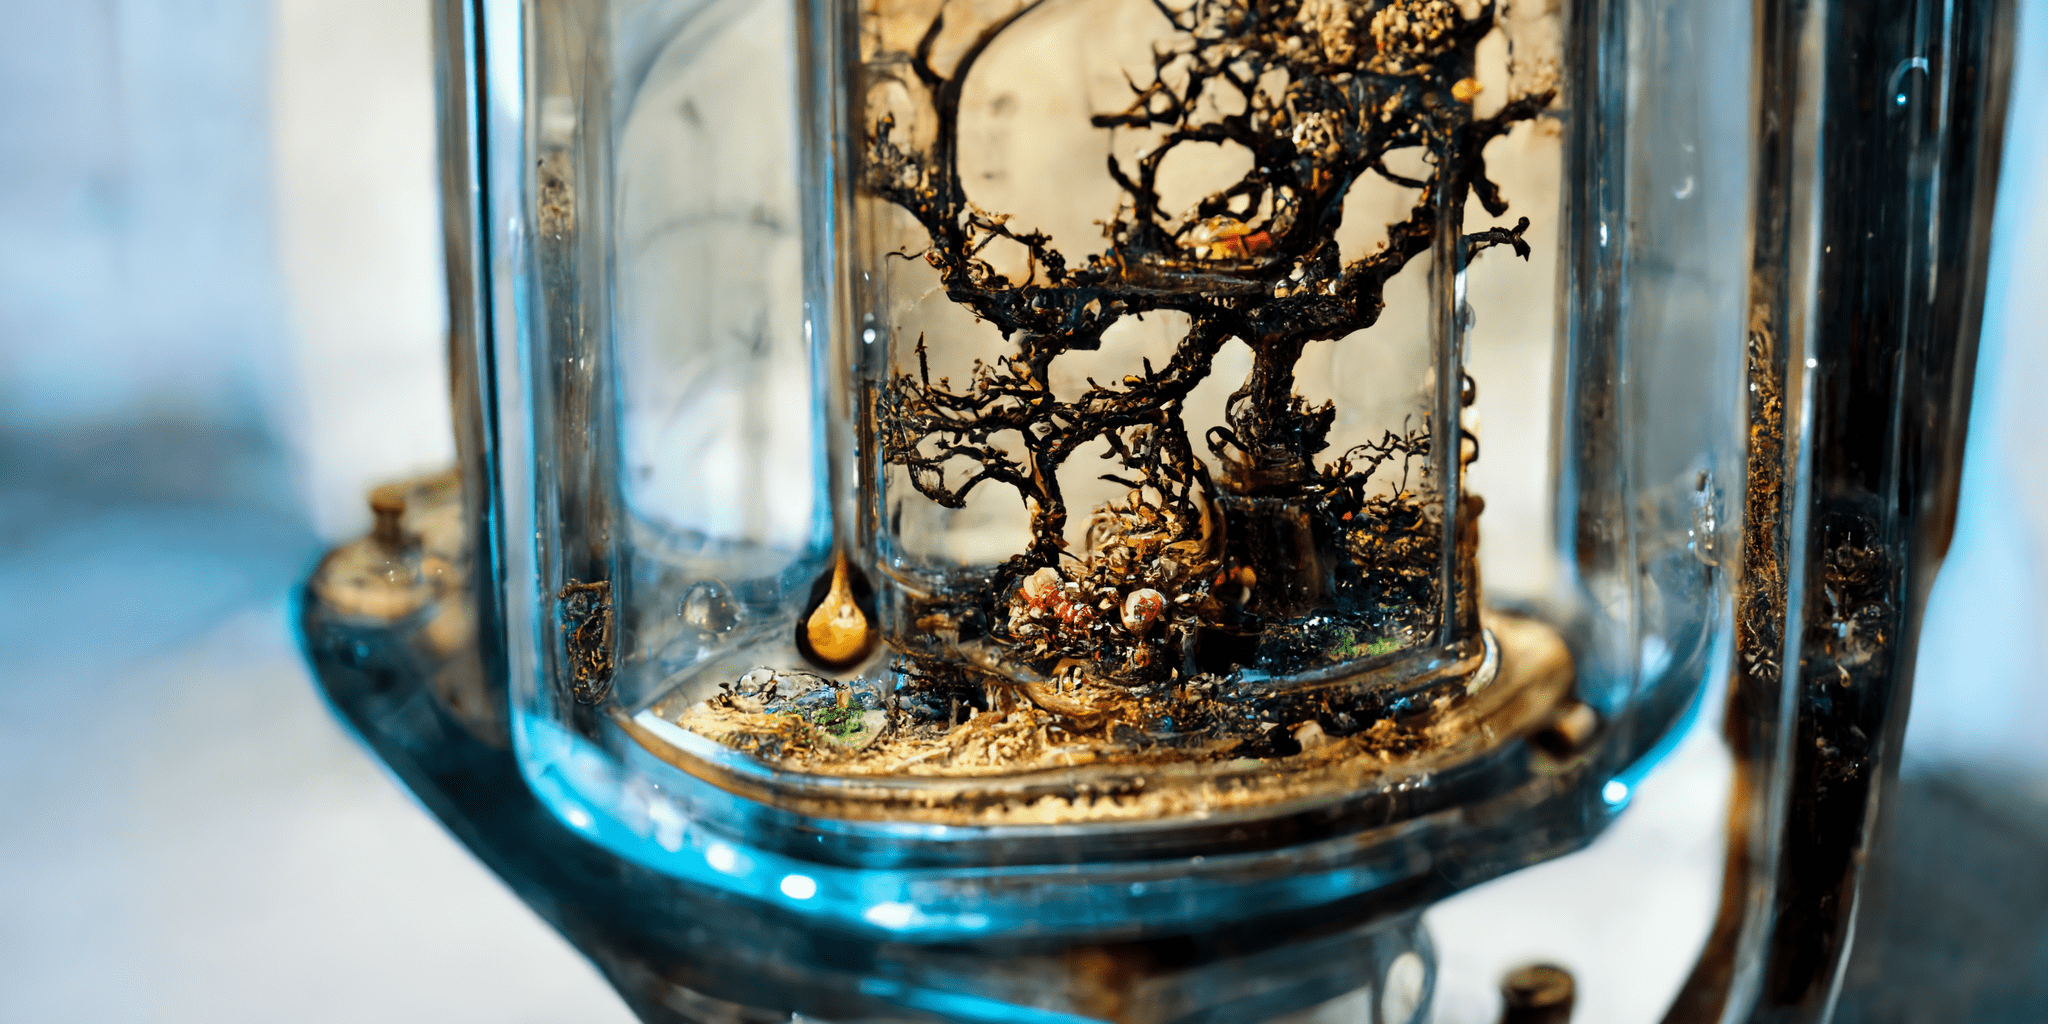 In an hourglass I cannot turn upside down – tree in a glass